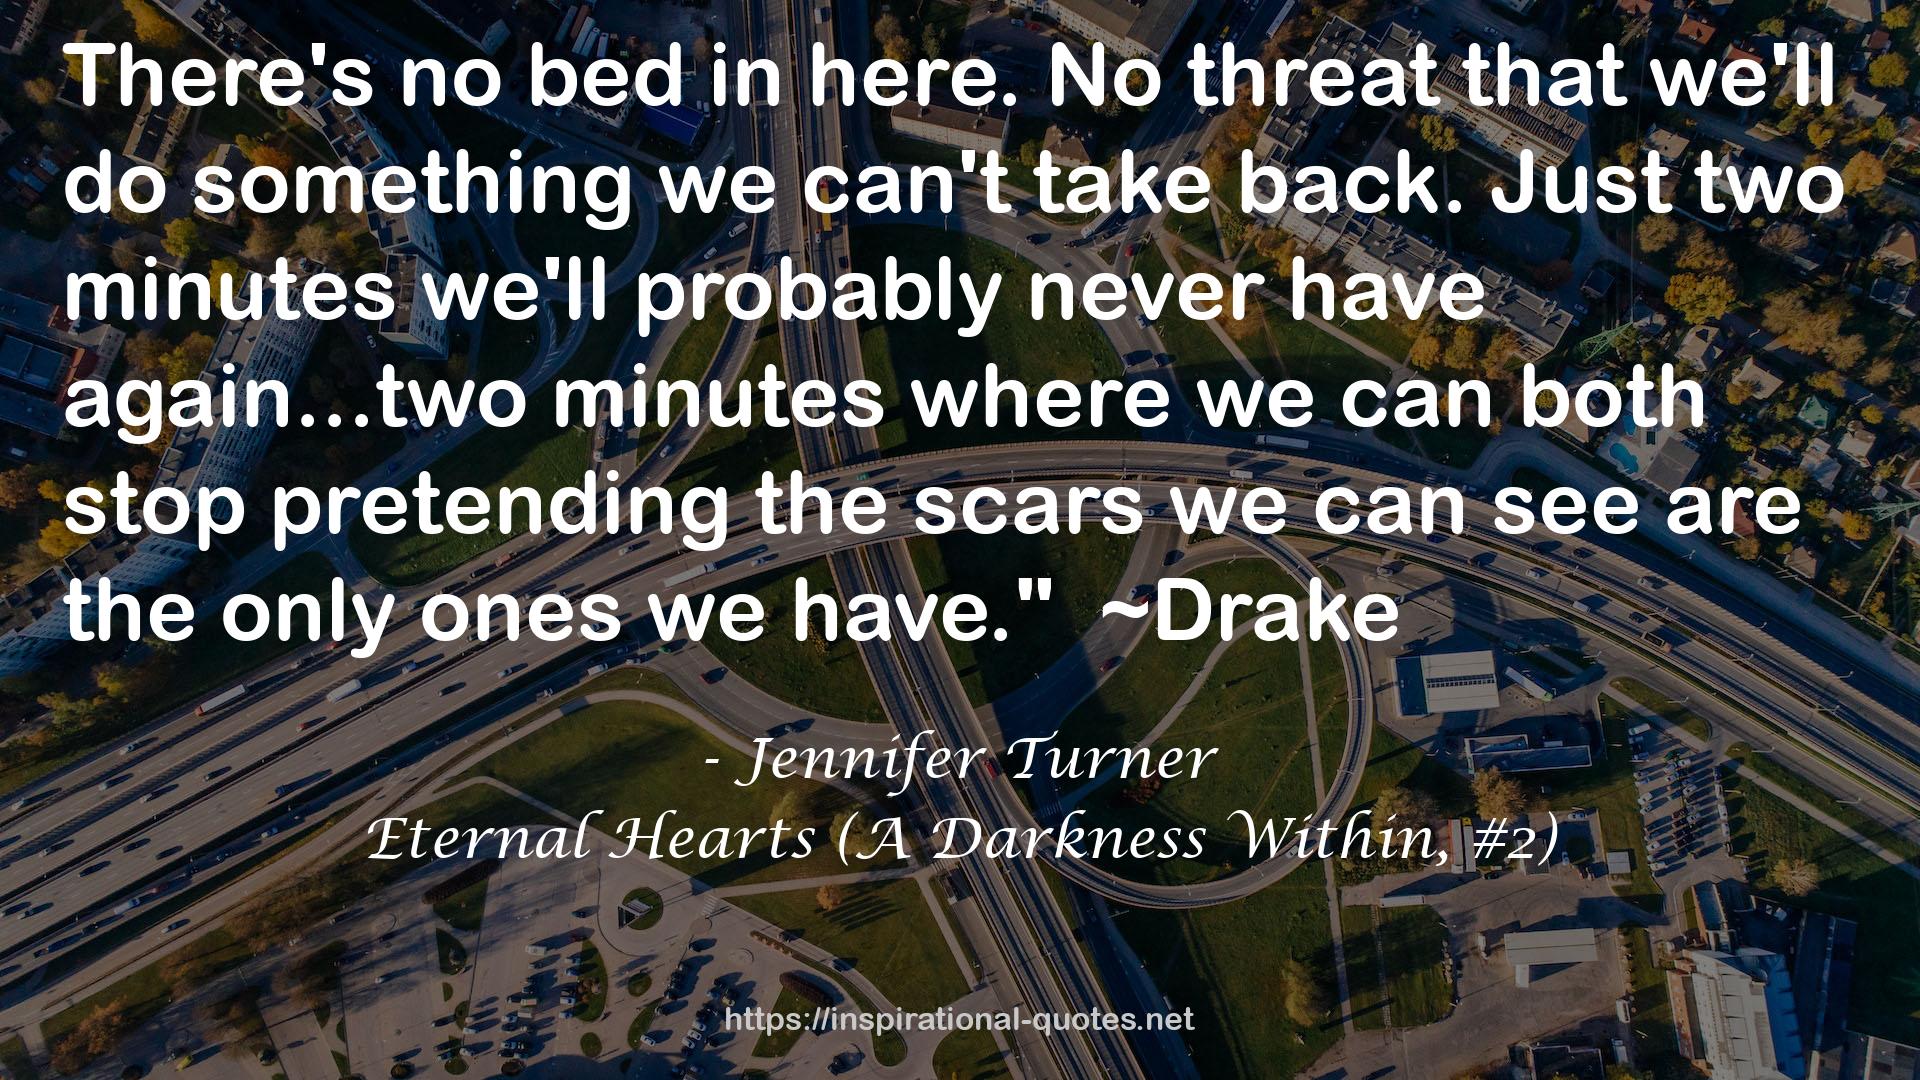 Eternal Hearts (A Darkness Within, #2) QUOTES